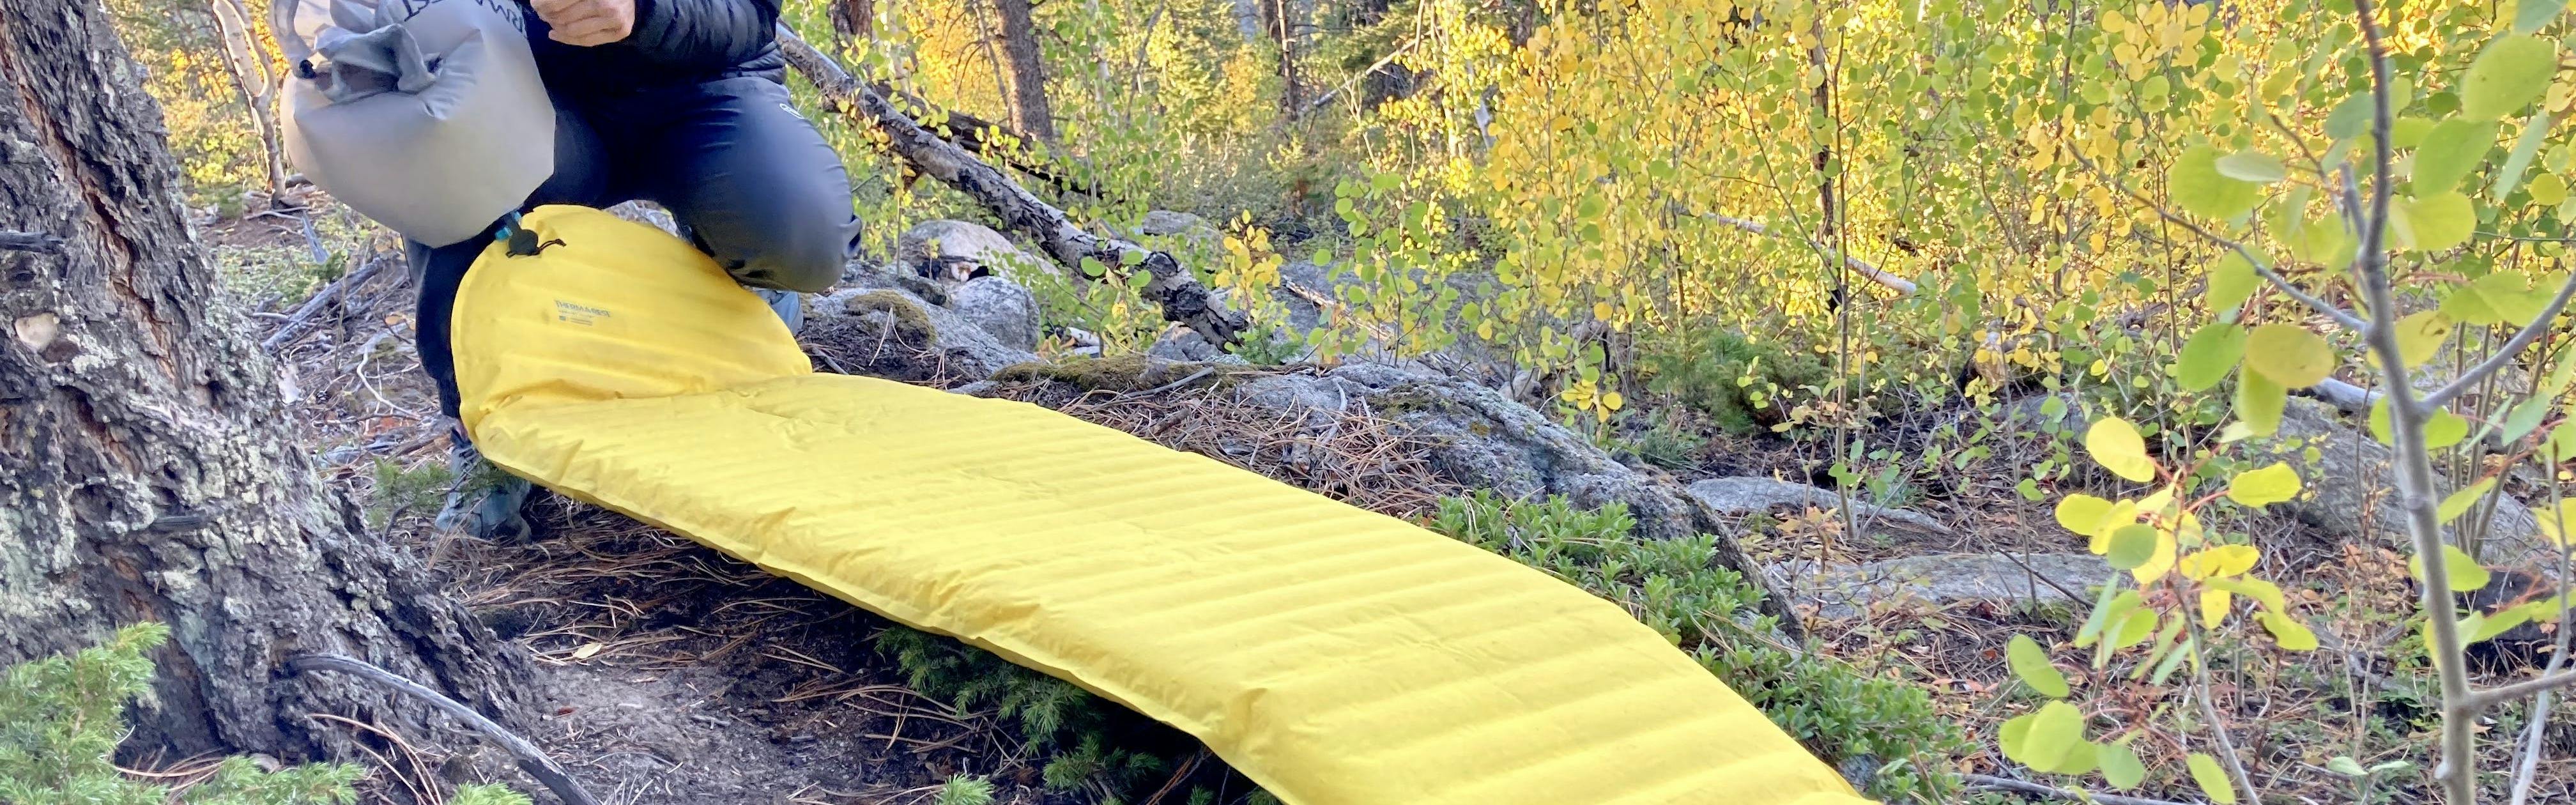 The Therm-a-Rest Neoair Xlite Sleeping Pad laying outside. 